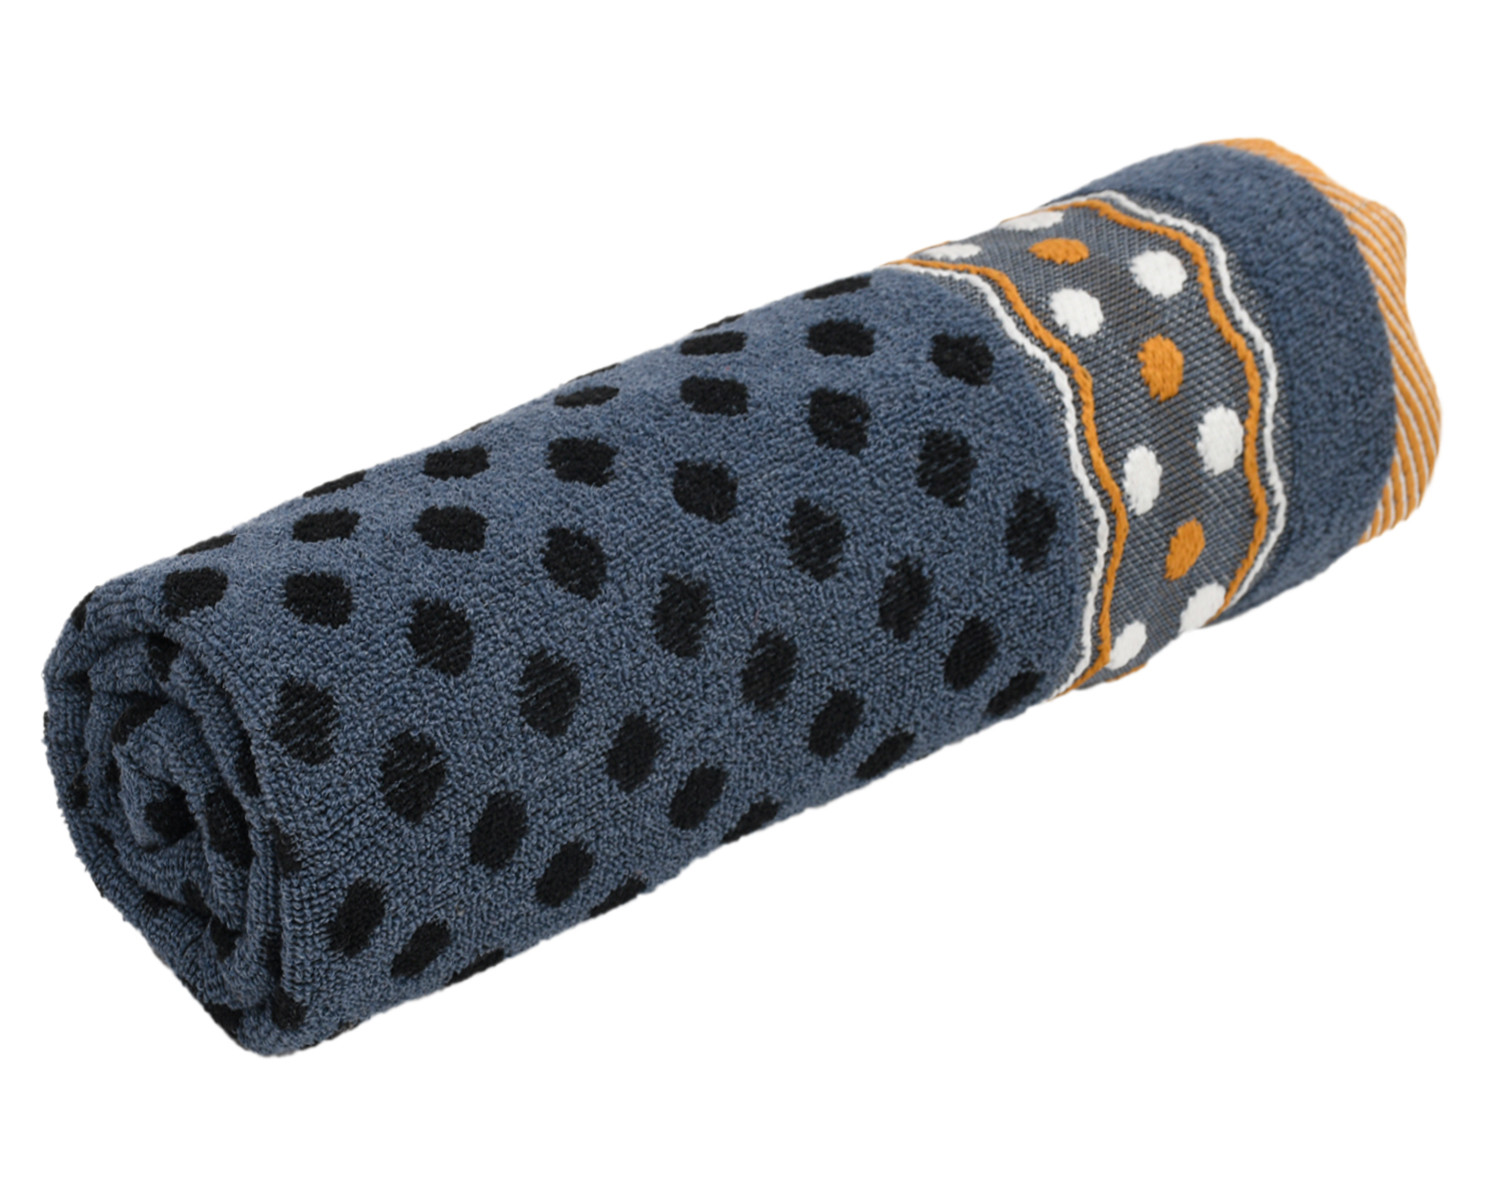 Kuber Industries Luxurious Dot Printed Soft Cotton Bath Towel Perfect for Daily Use, 30